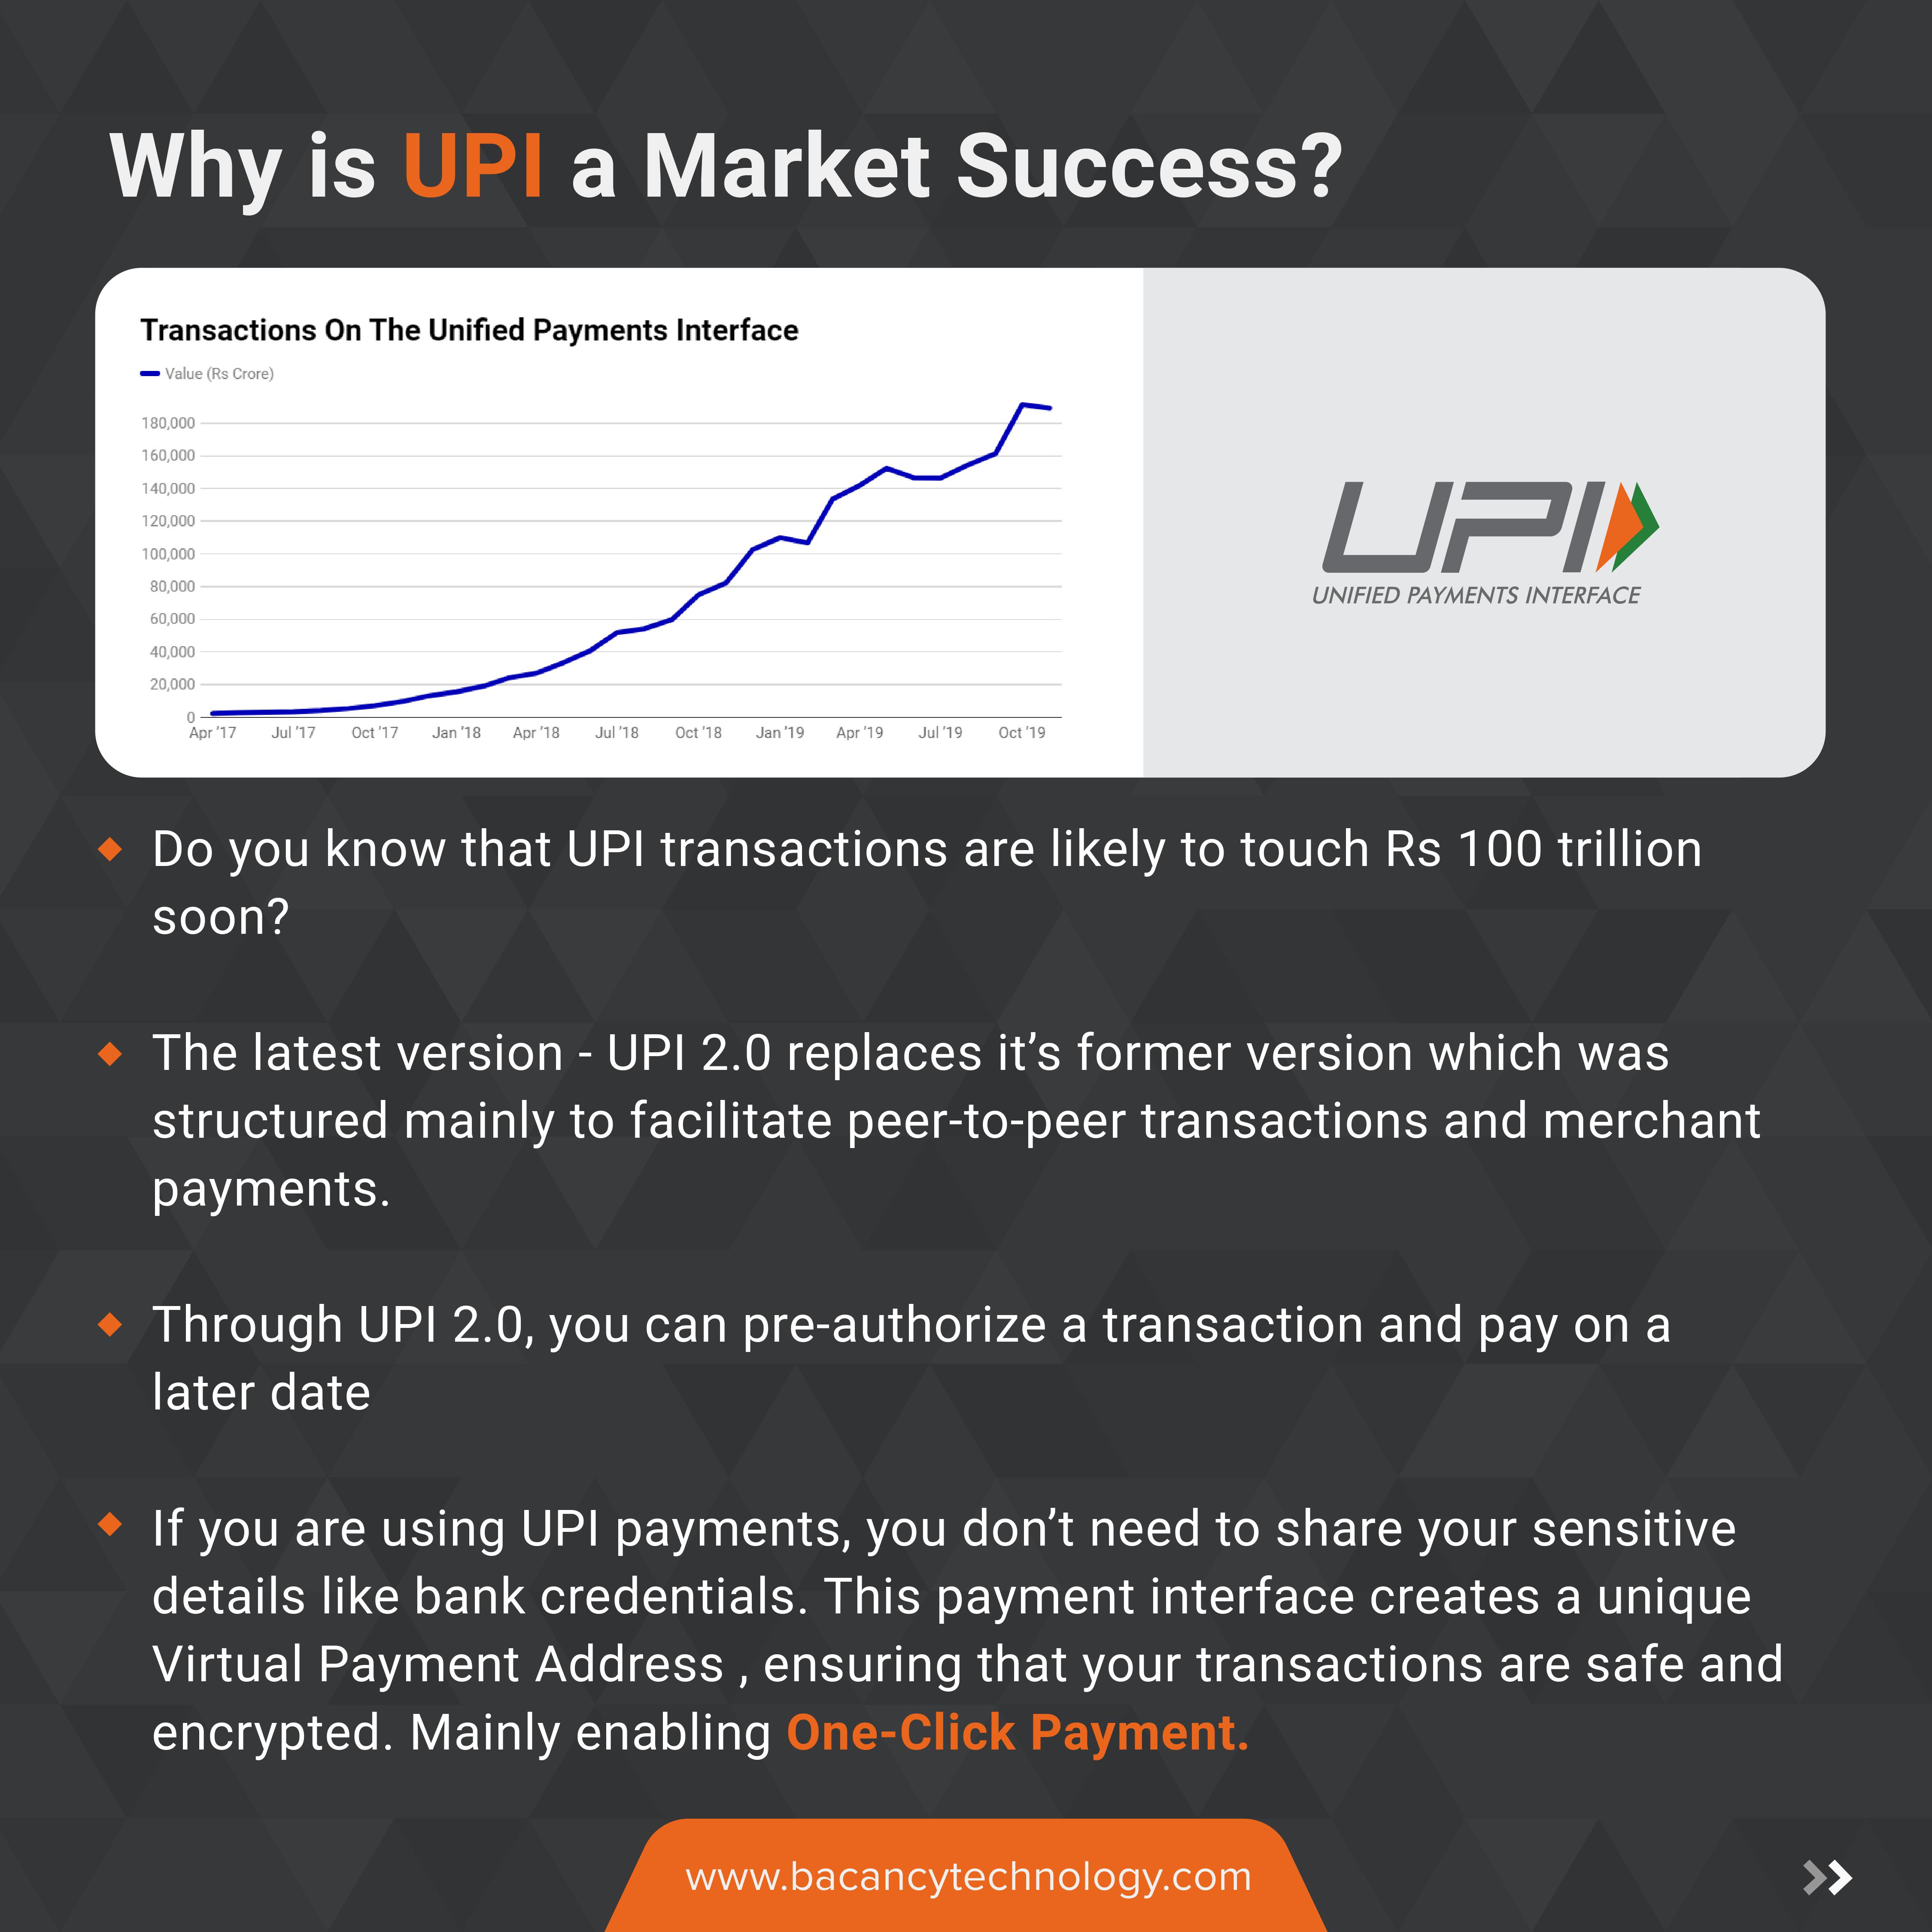 How does Unified Payment Interface (UPI) work?